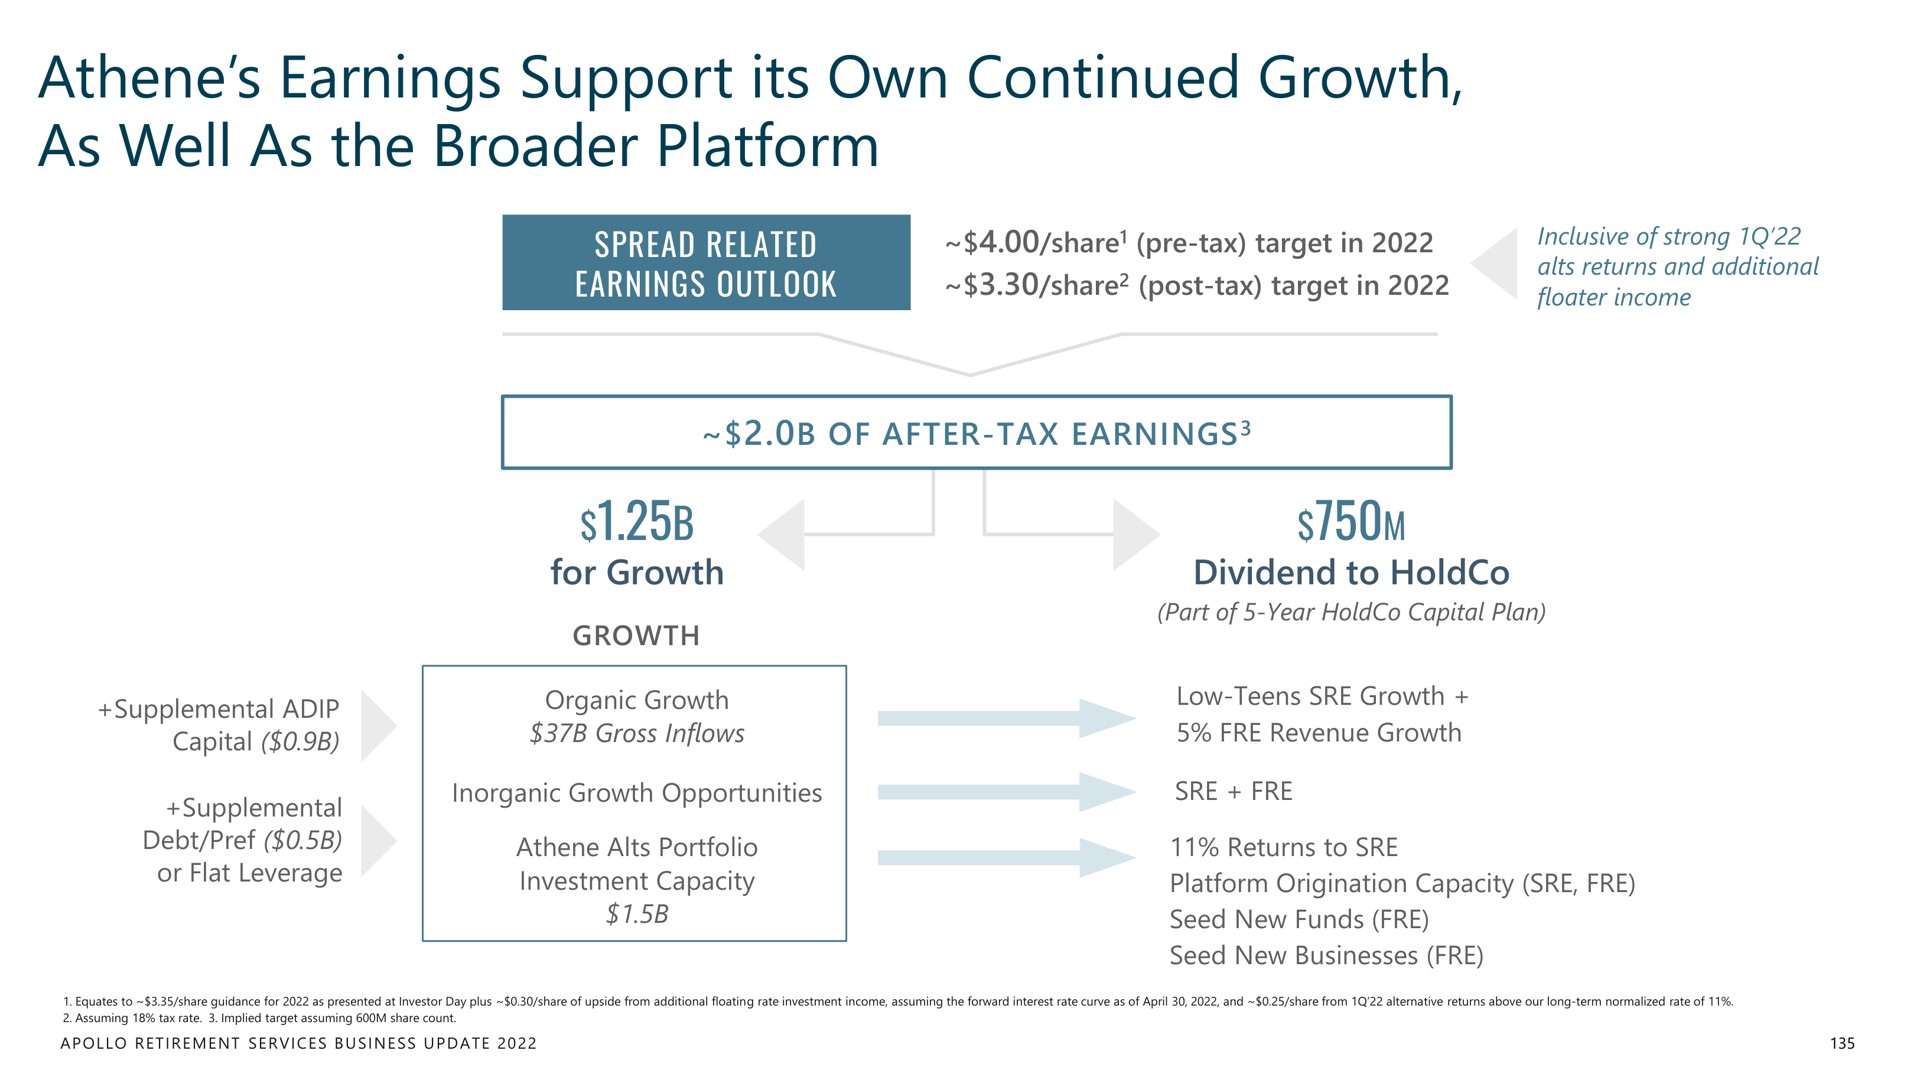 earnings support its own continued growth as well as the platform | Apollo Global Management